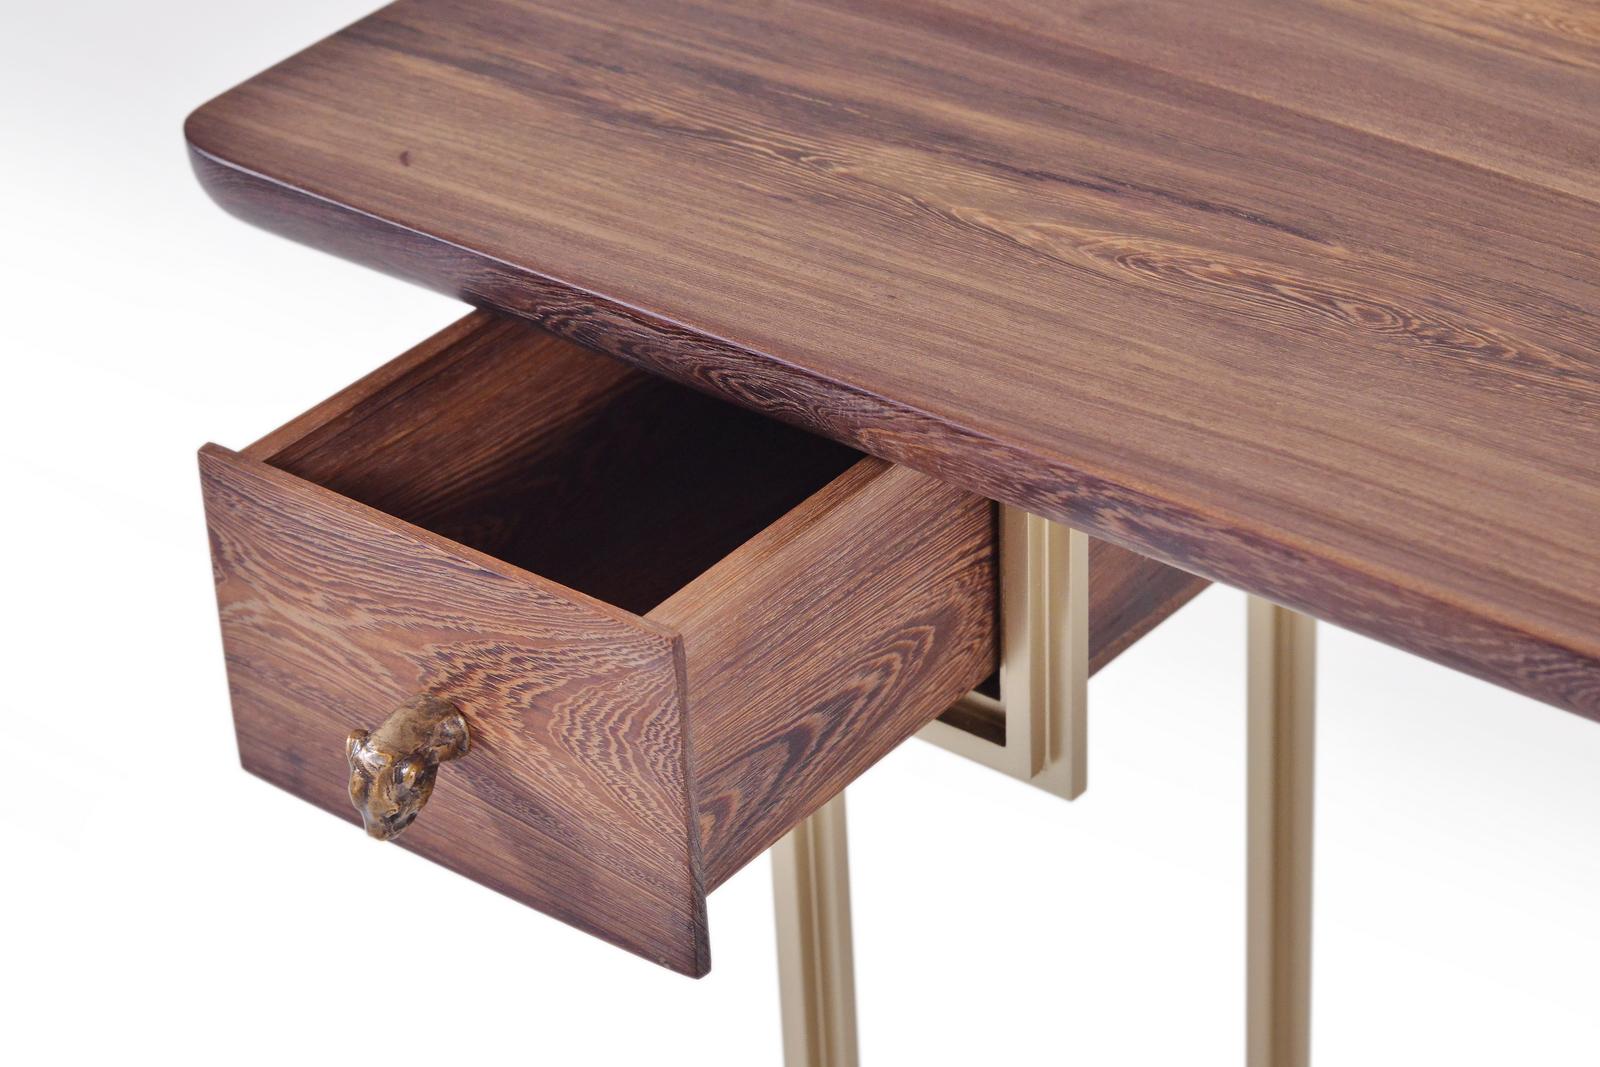 Bespoke Desk, Reclaimed Wood, Extruded Hand Weld Brass Frame, by P. Tendercool For Sale 1